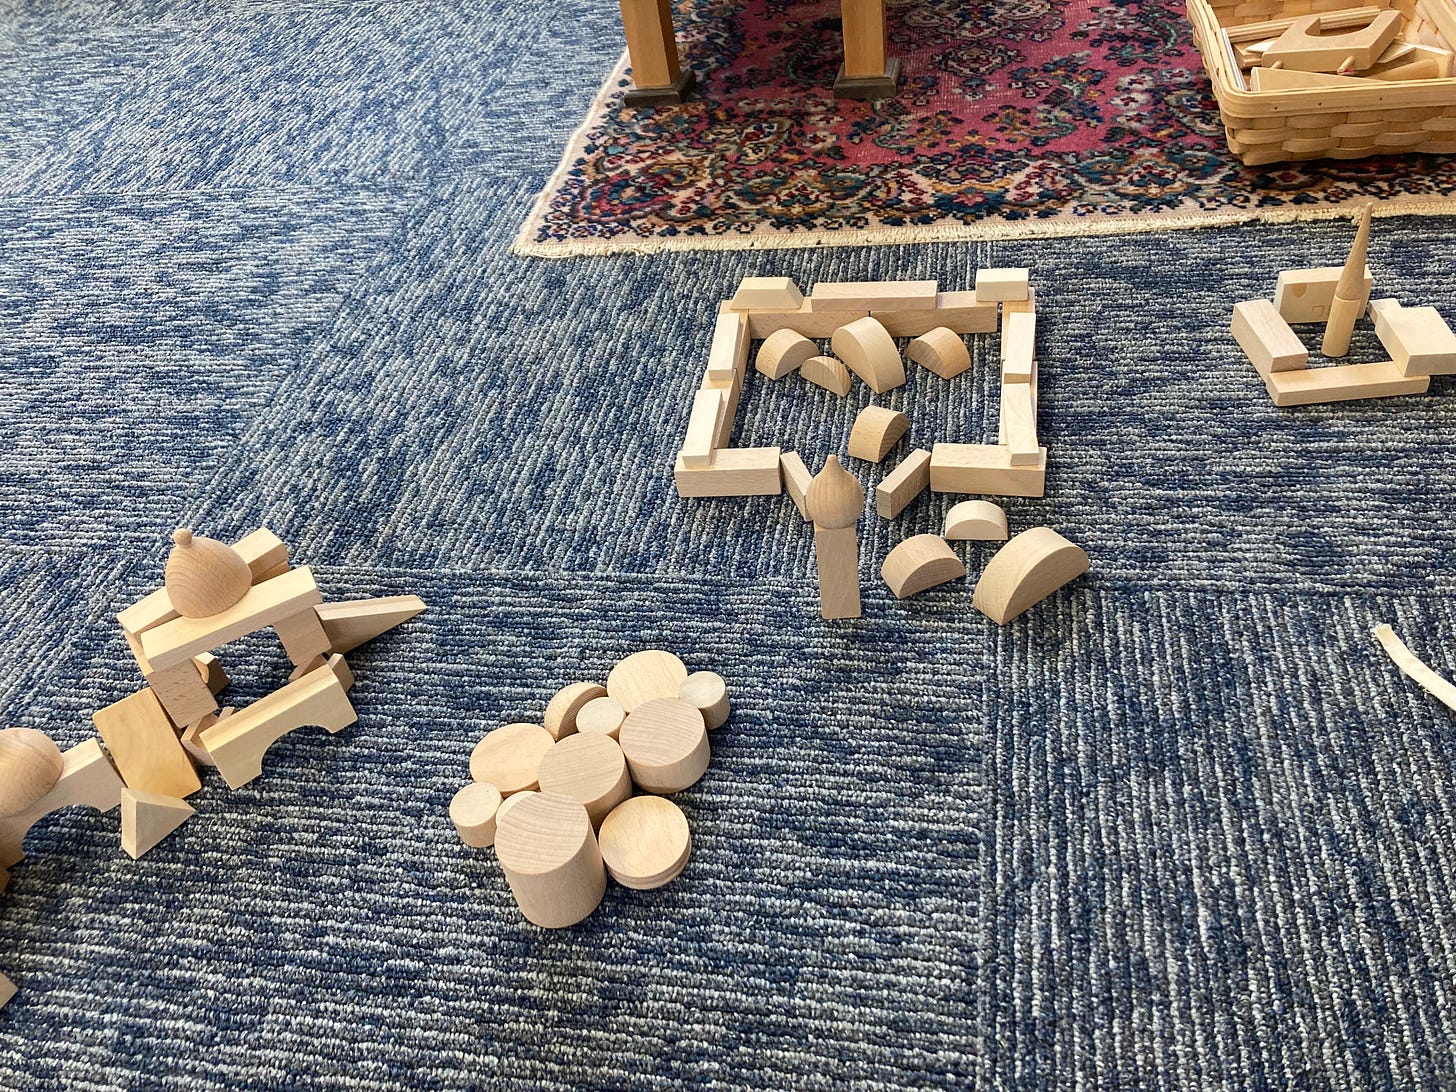 a variety of clusters of light wood building blocks are set out on blue carpet